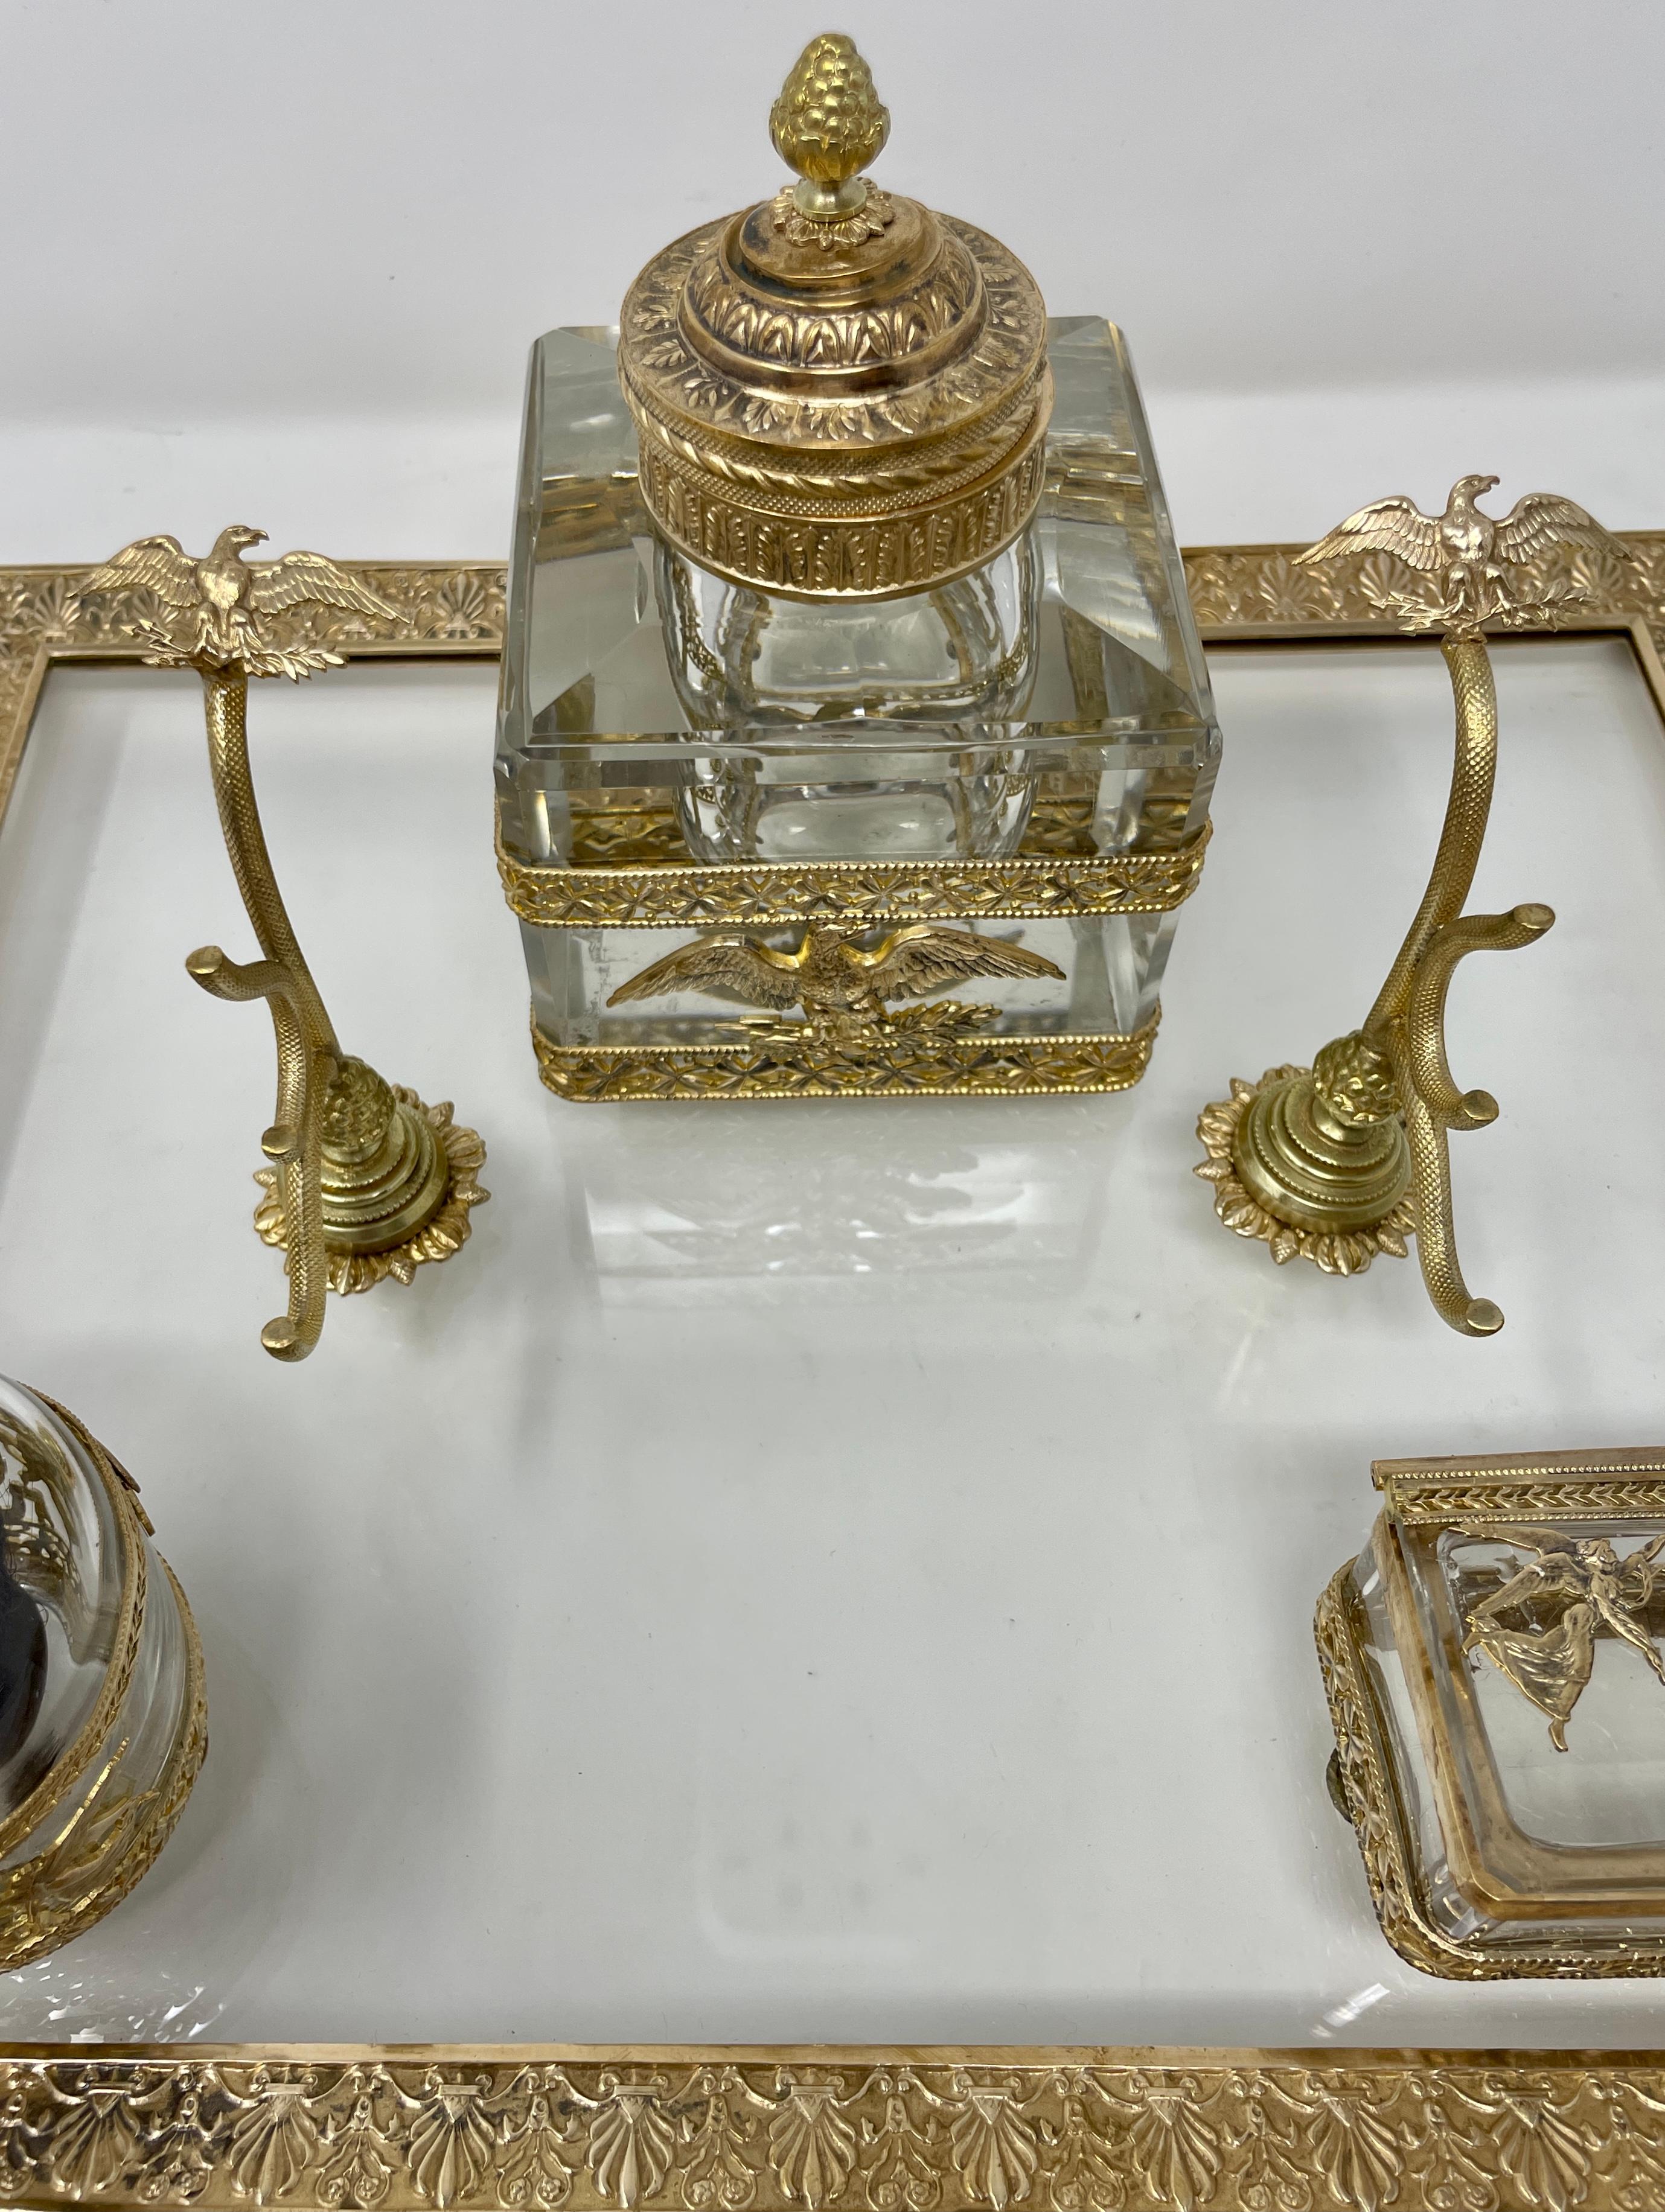 20th Century Antique French Bronze D'ore & Cut Crystal Inkwell Desk Set on Stand, Circa 1900 For Sale